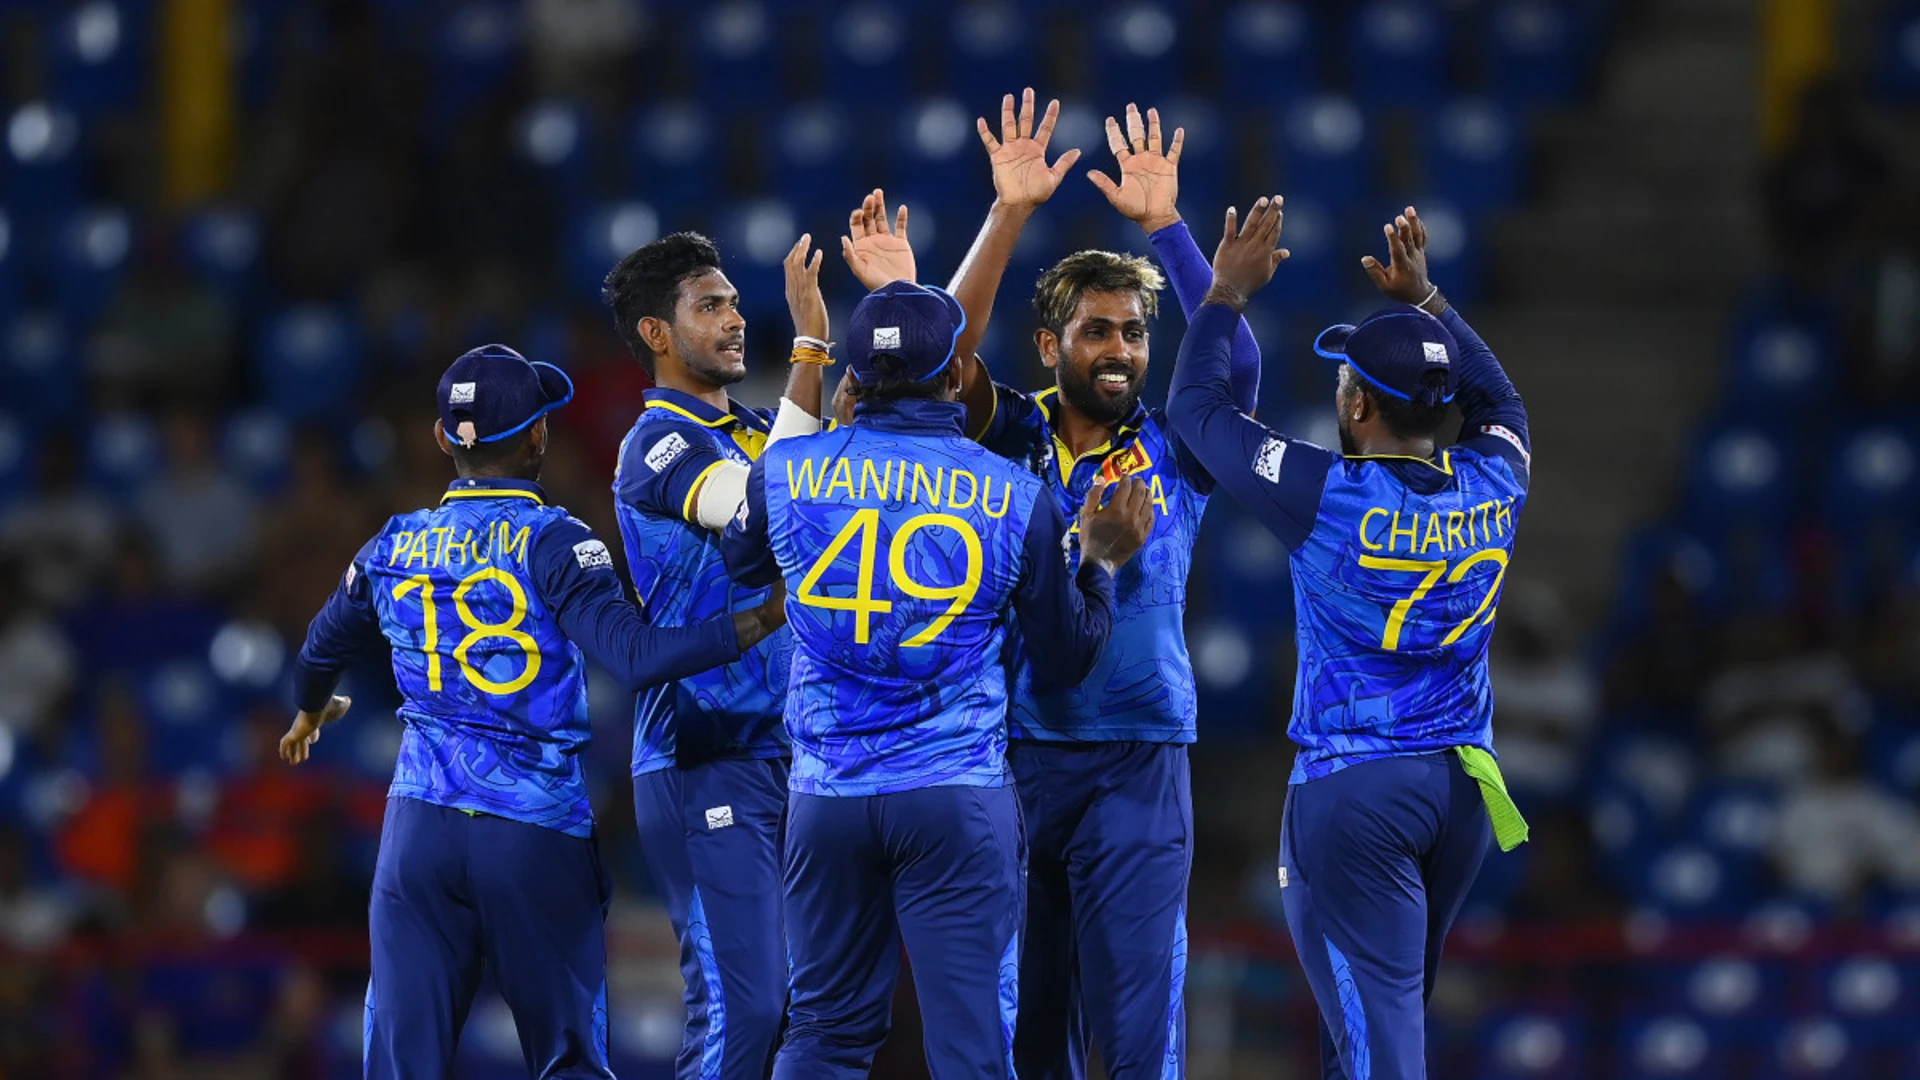 Sri Lanka deliver big win over Dutch as they bow out of T20 World Cup